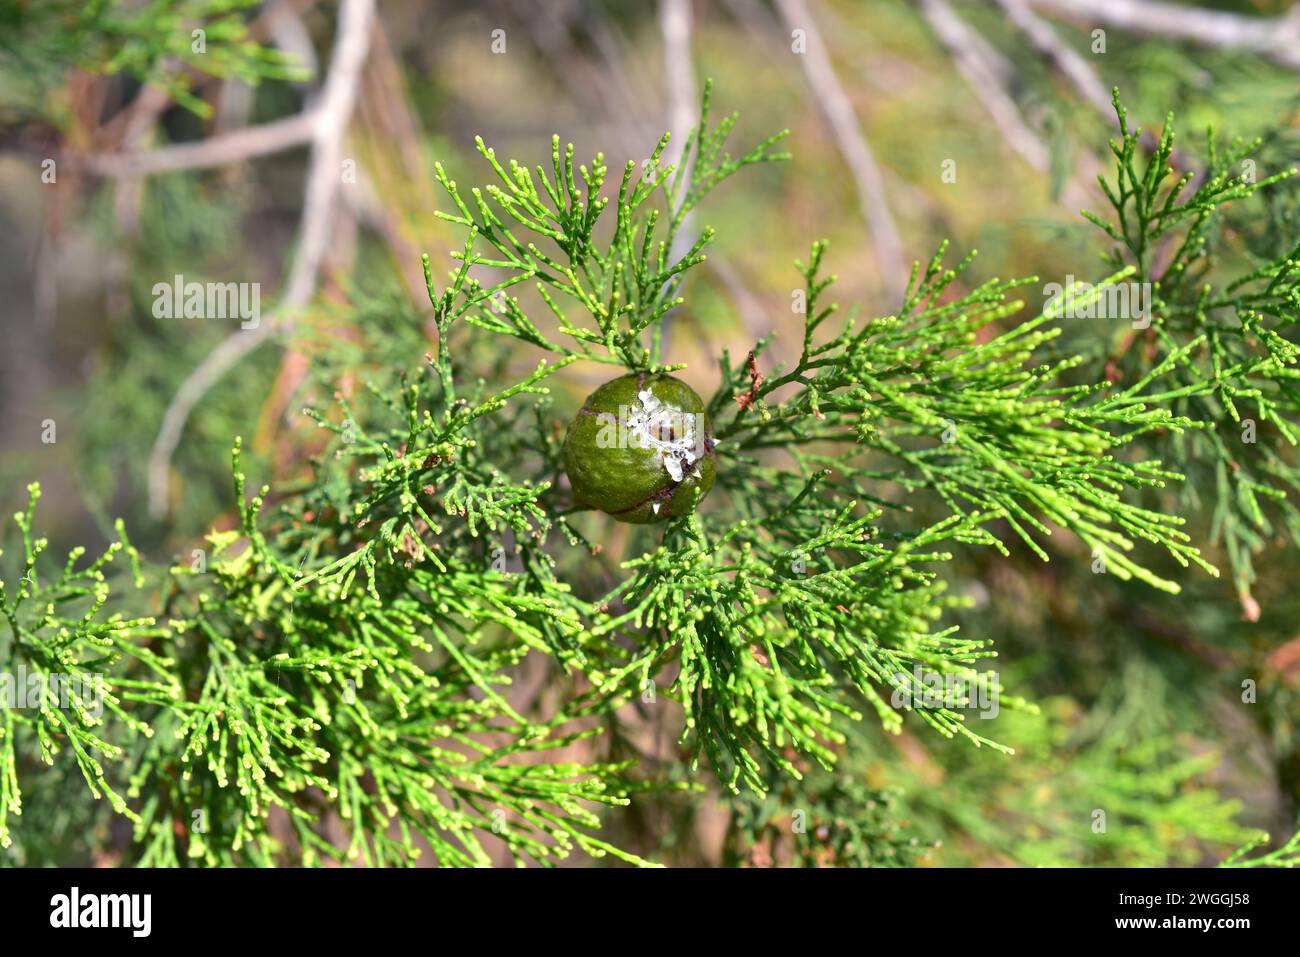 Rottnest Island pine or southern cypres pine (Callitris preissii) is a conifer endemic to Australia. Resin fruit and leaves detail. Stock Photo